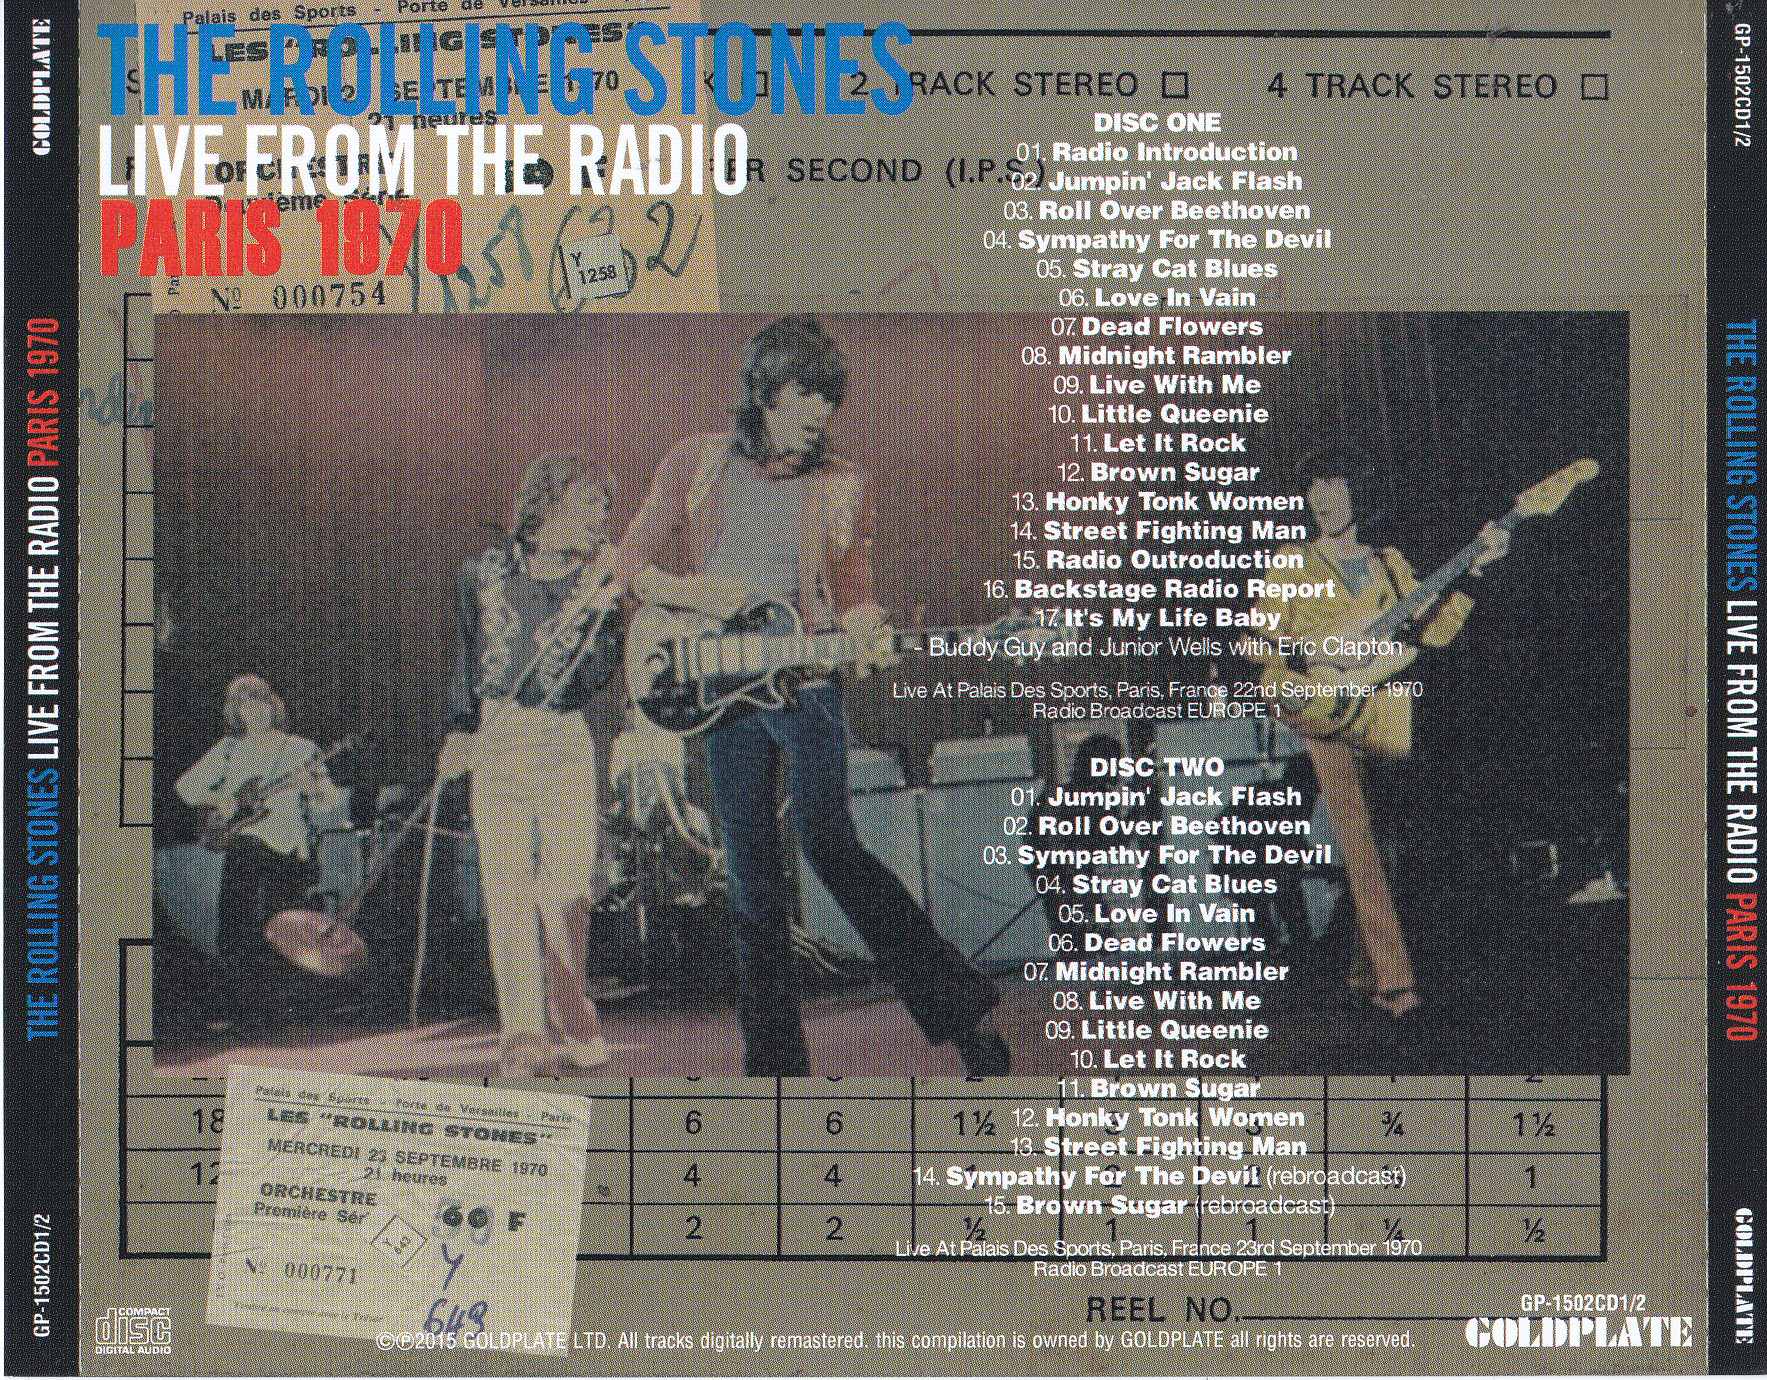 Rolling Stones / Live From The Radio Paris 1970 / 2CD – GiGinJapan